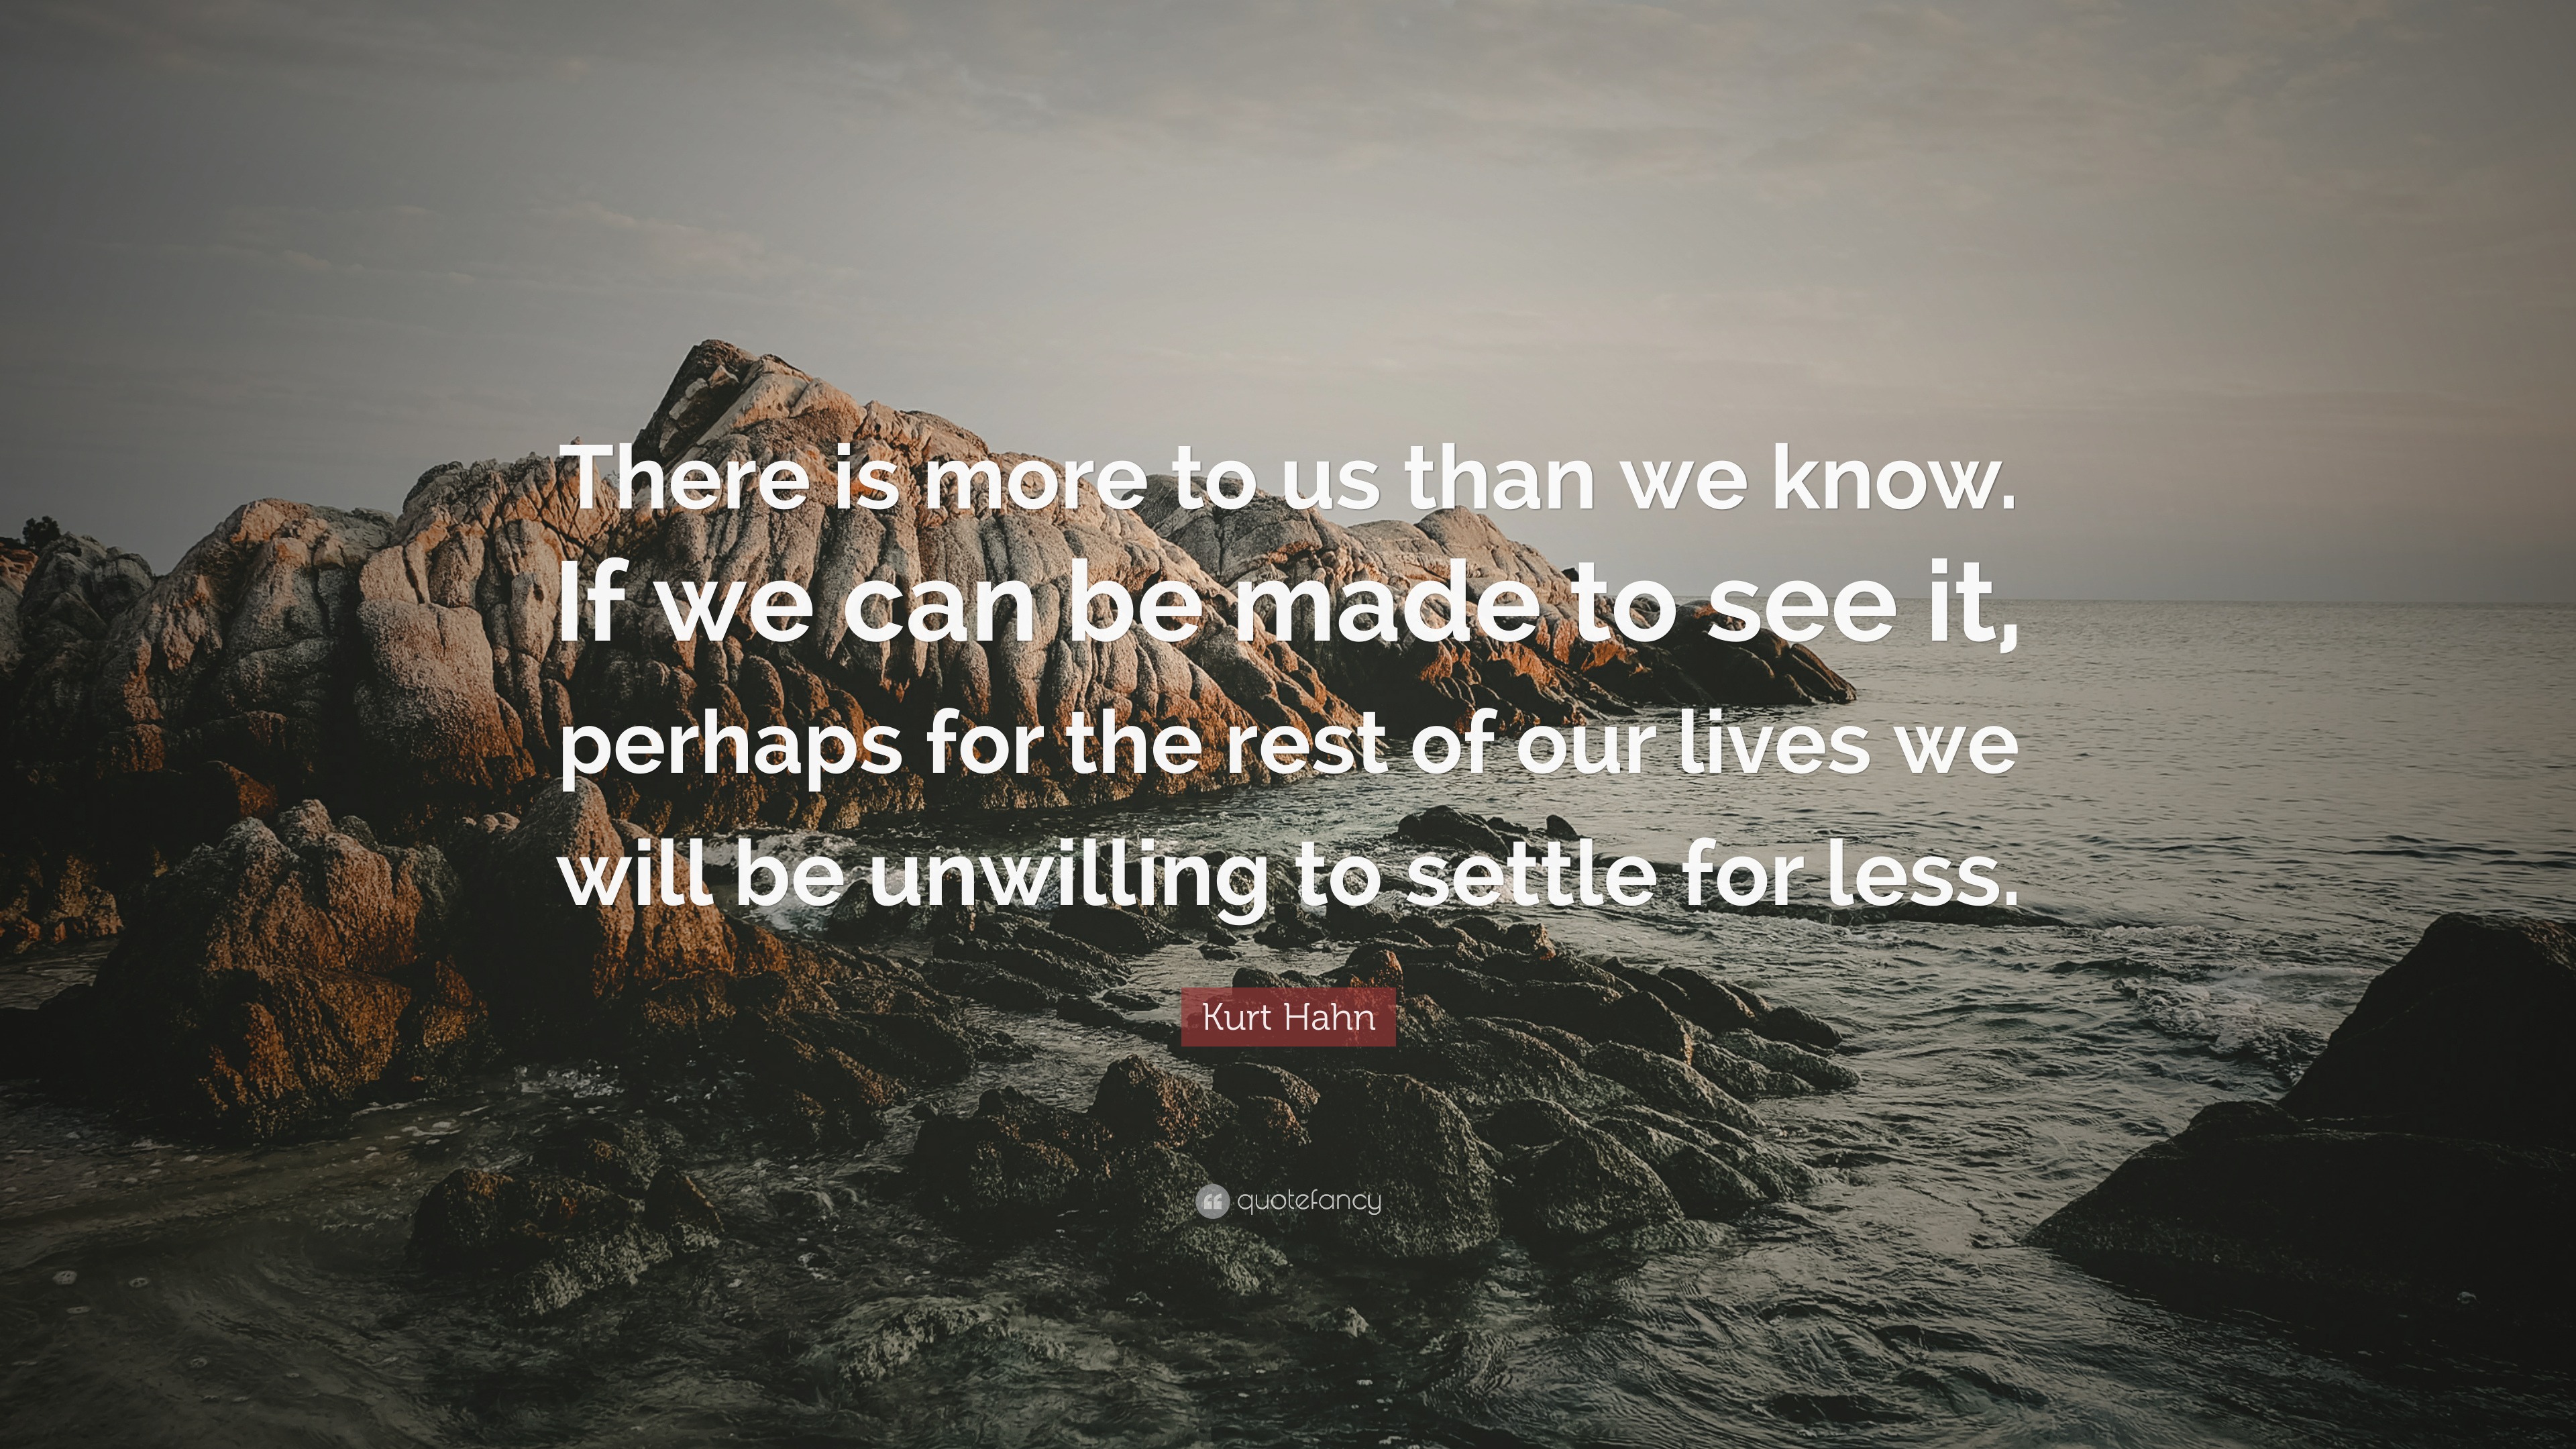 Kurt Hahn Quote: “There is more to us than we know. If we can be made ...